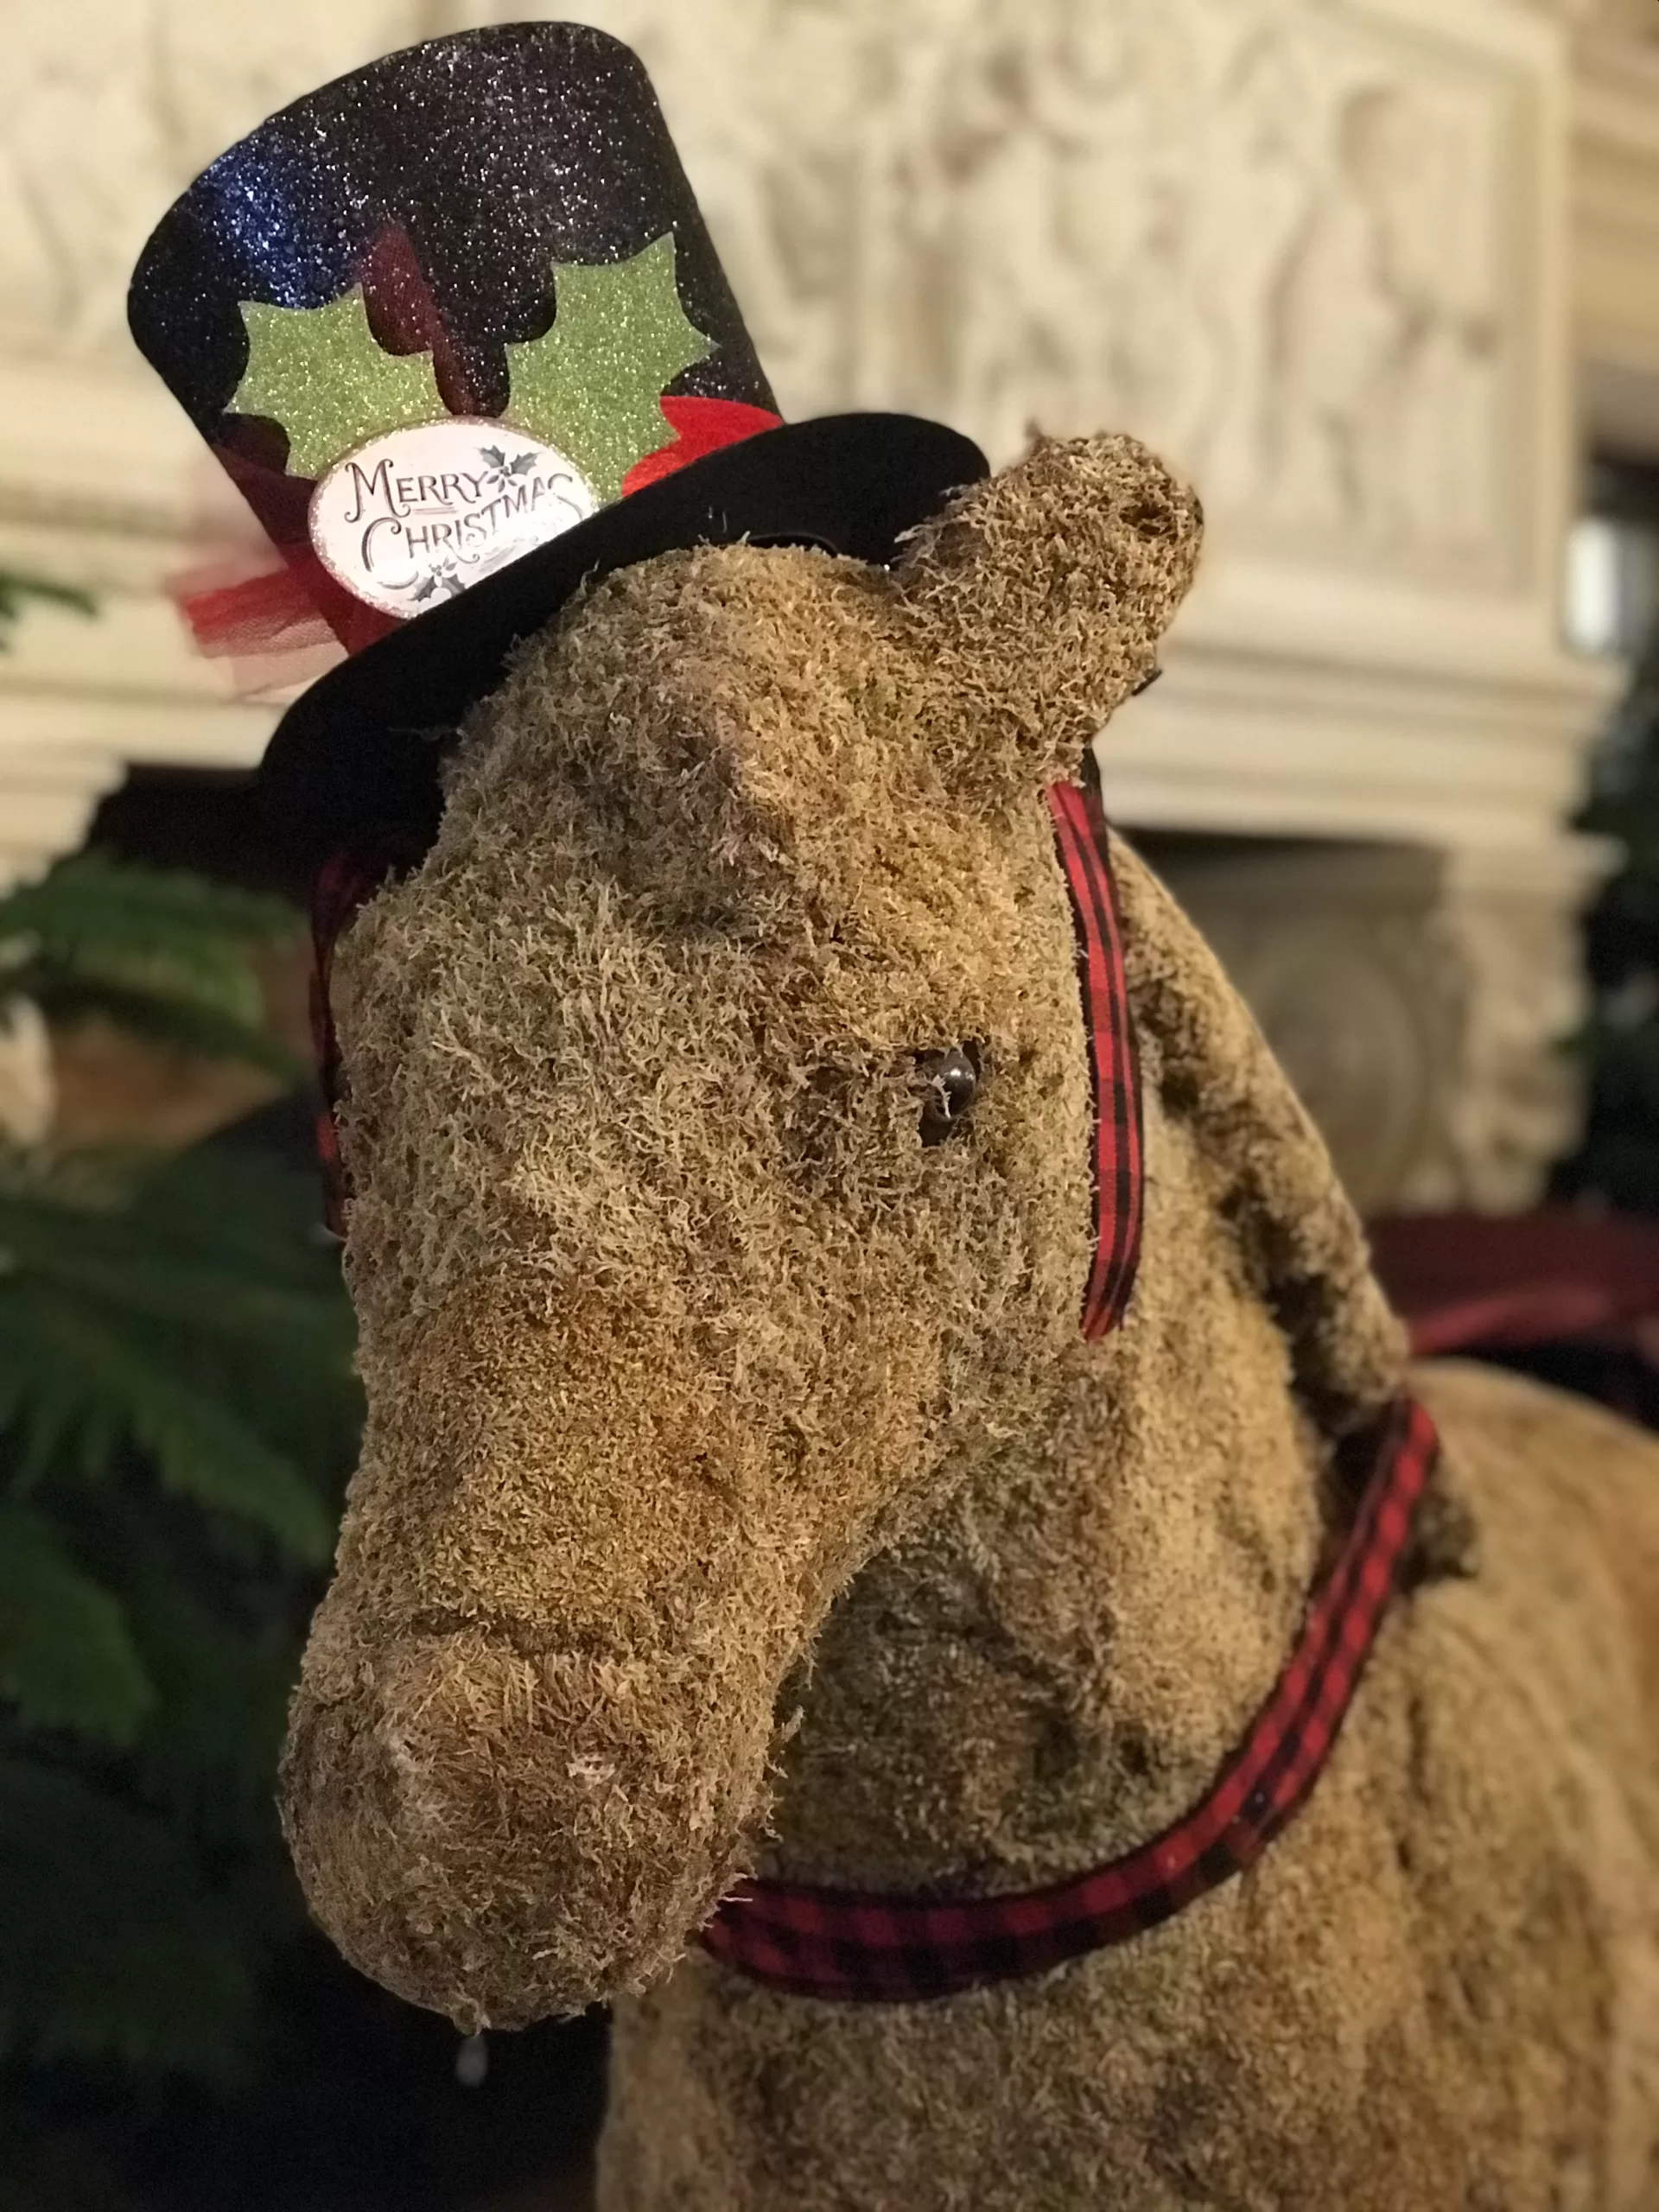 A decorative horse made from Spanish moss wearing a black top hat that says "Merry Christmas" at The Breakers mansion in Newport, Rhode Island. 